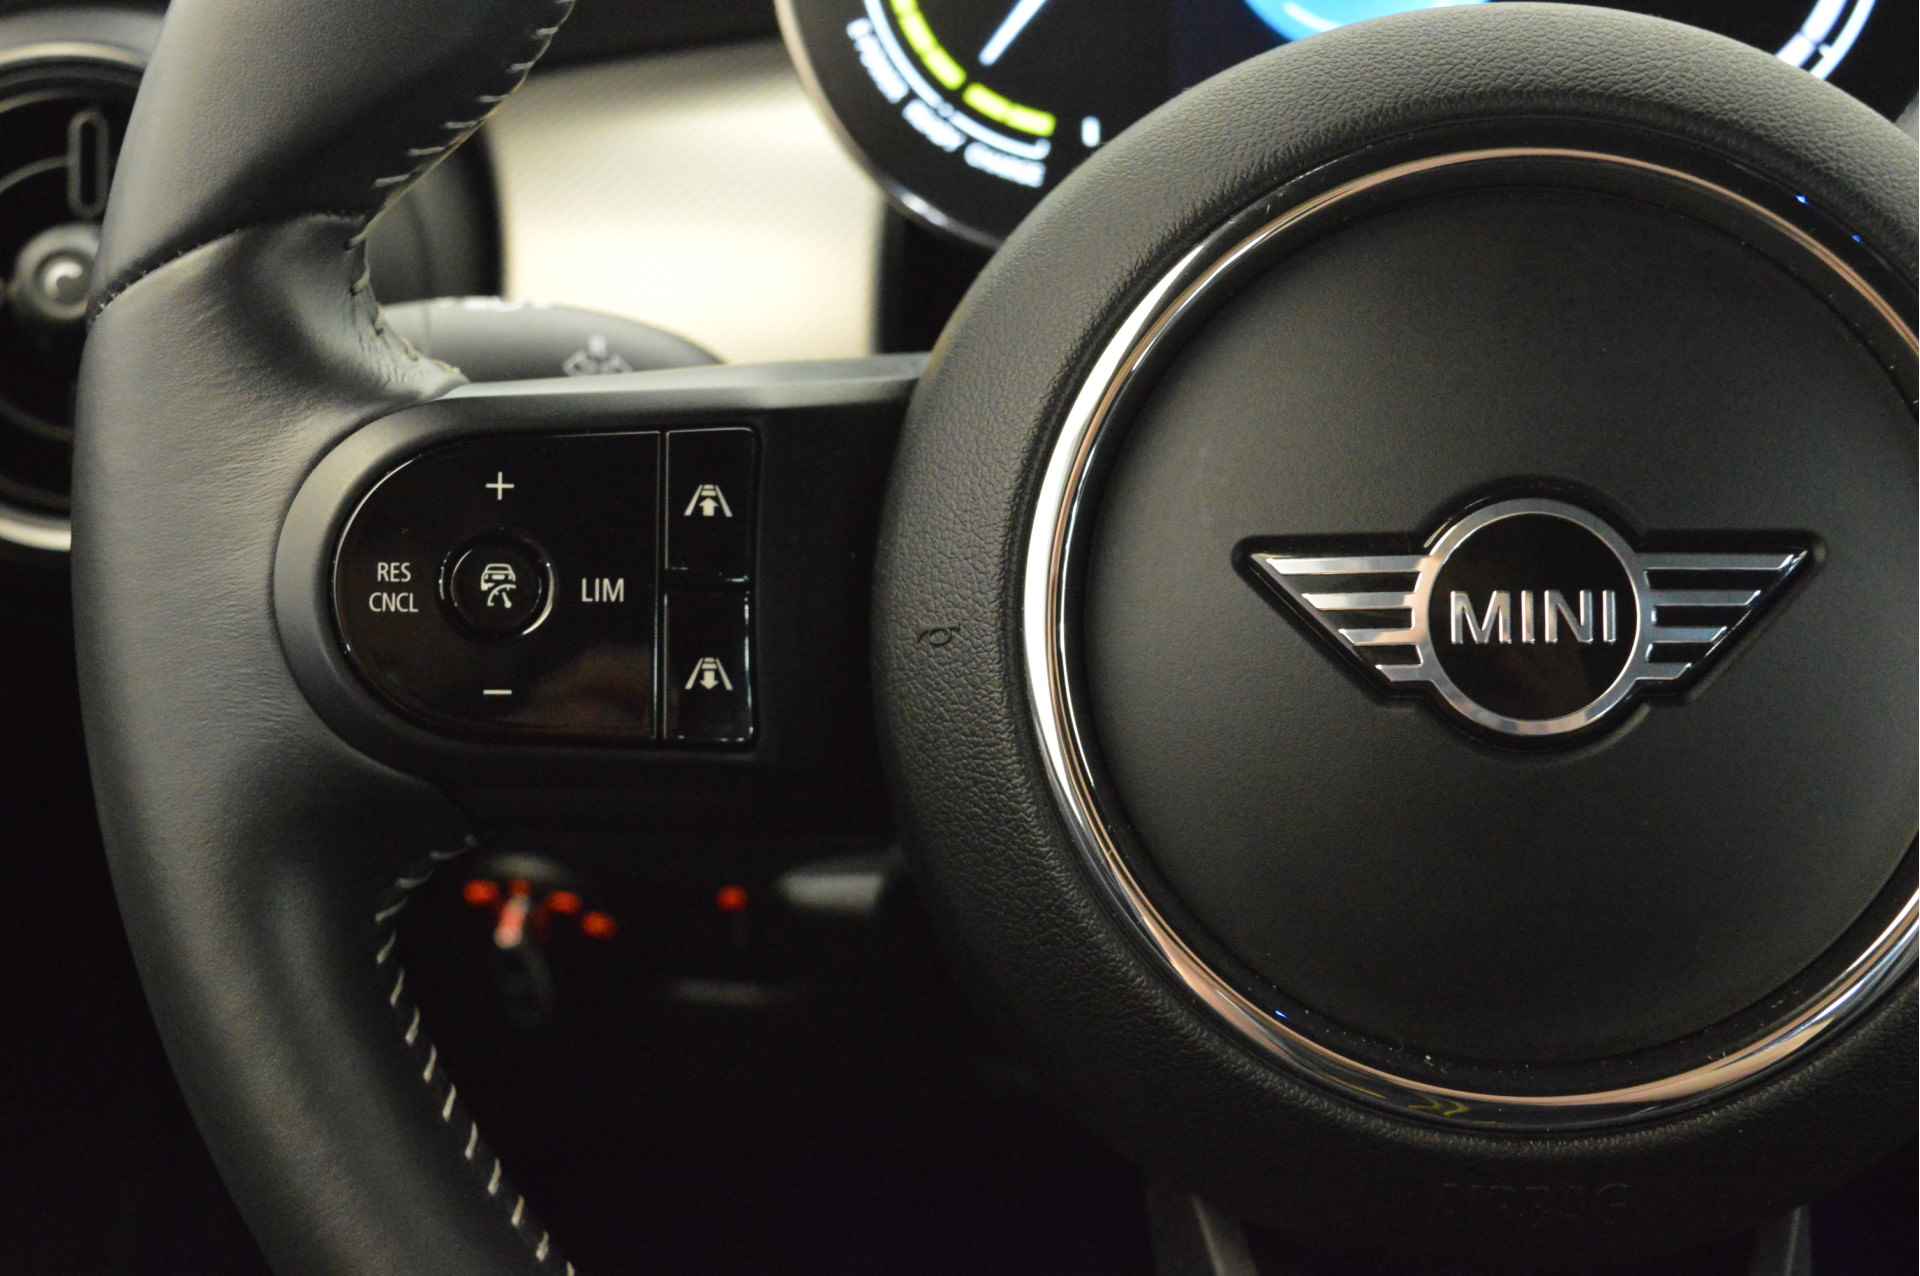 MINI Electric 33 kWh / Achteruitrijcamera / Active Cruise Control / Adaptieve LED / Park Assistant / Driving Assistant - 13/20